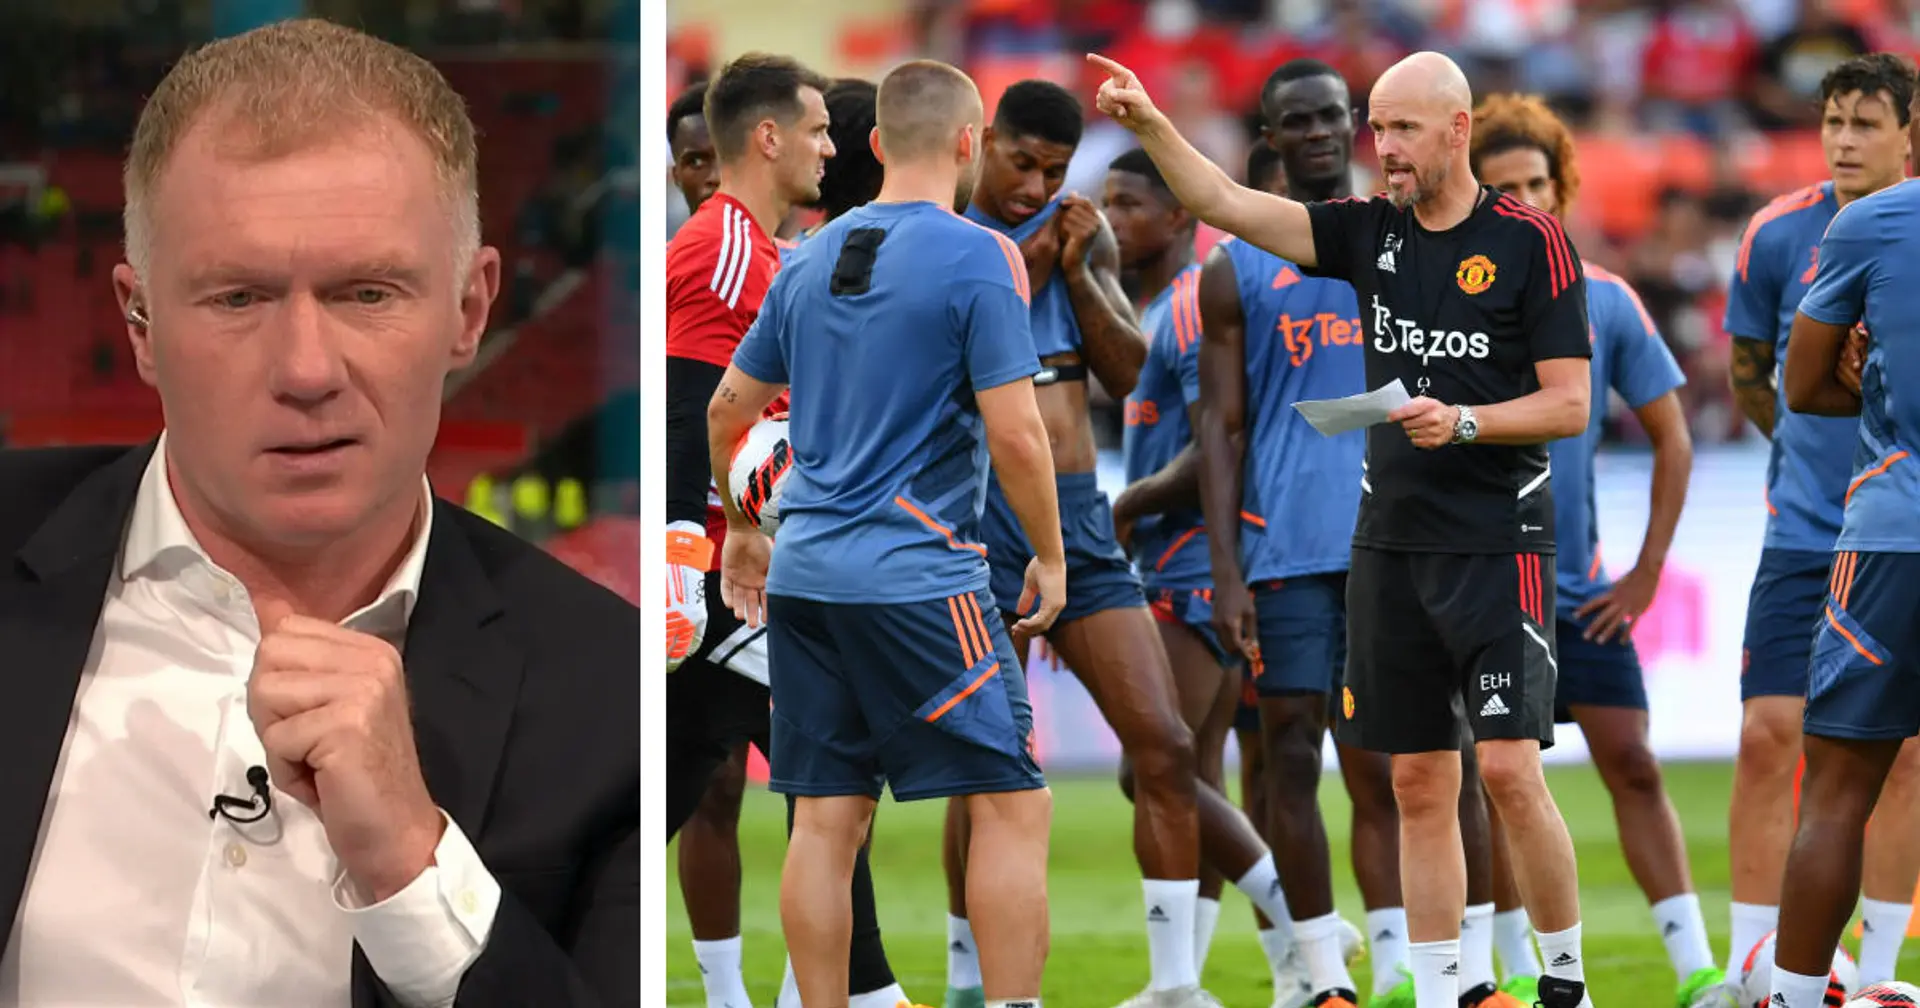 Paul Scholes: 'If Ten Hag can win FA Cup or League Cup in his first season, it will be big step forward' 